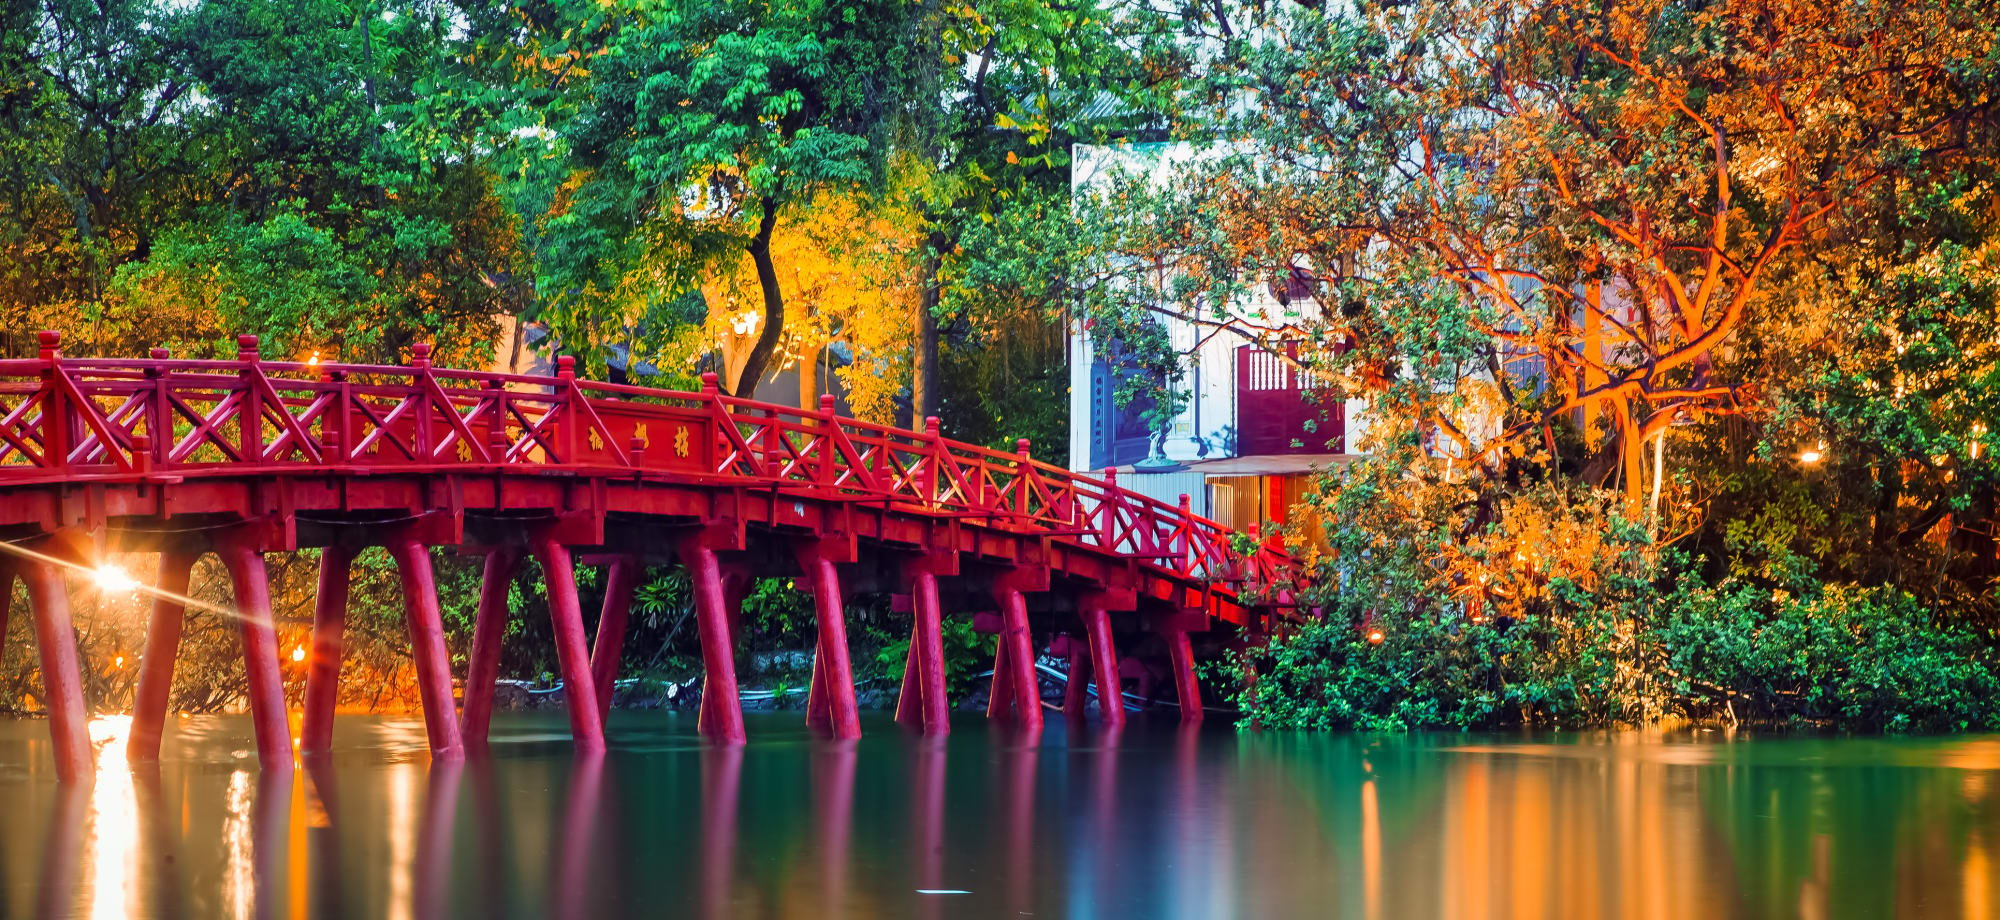 The Best Places to Visit in Hanoi, Vietnam